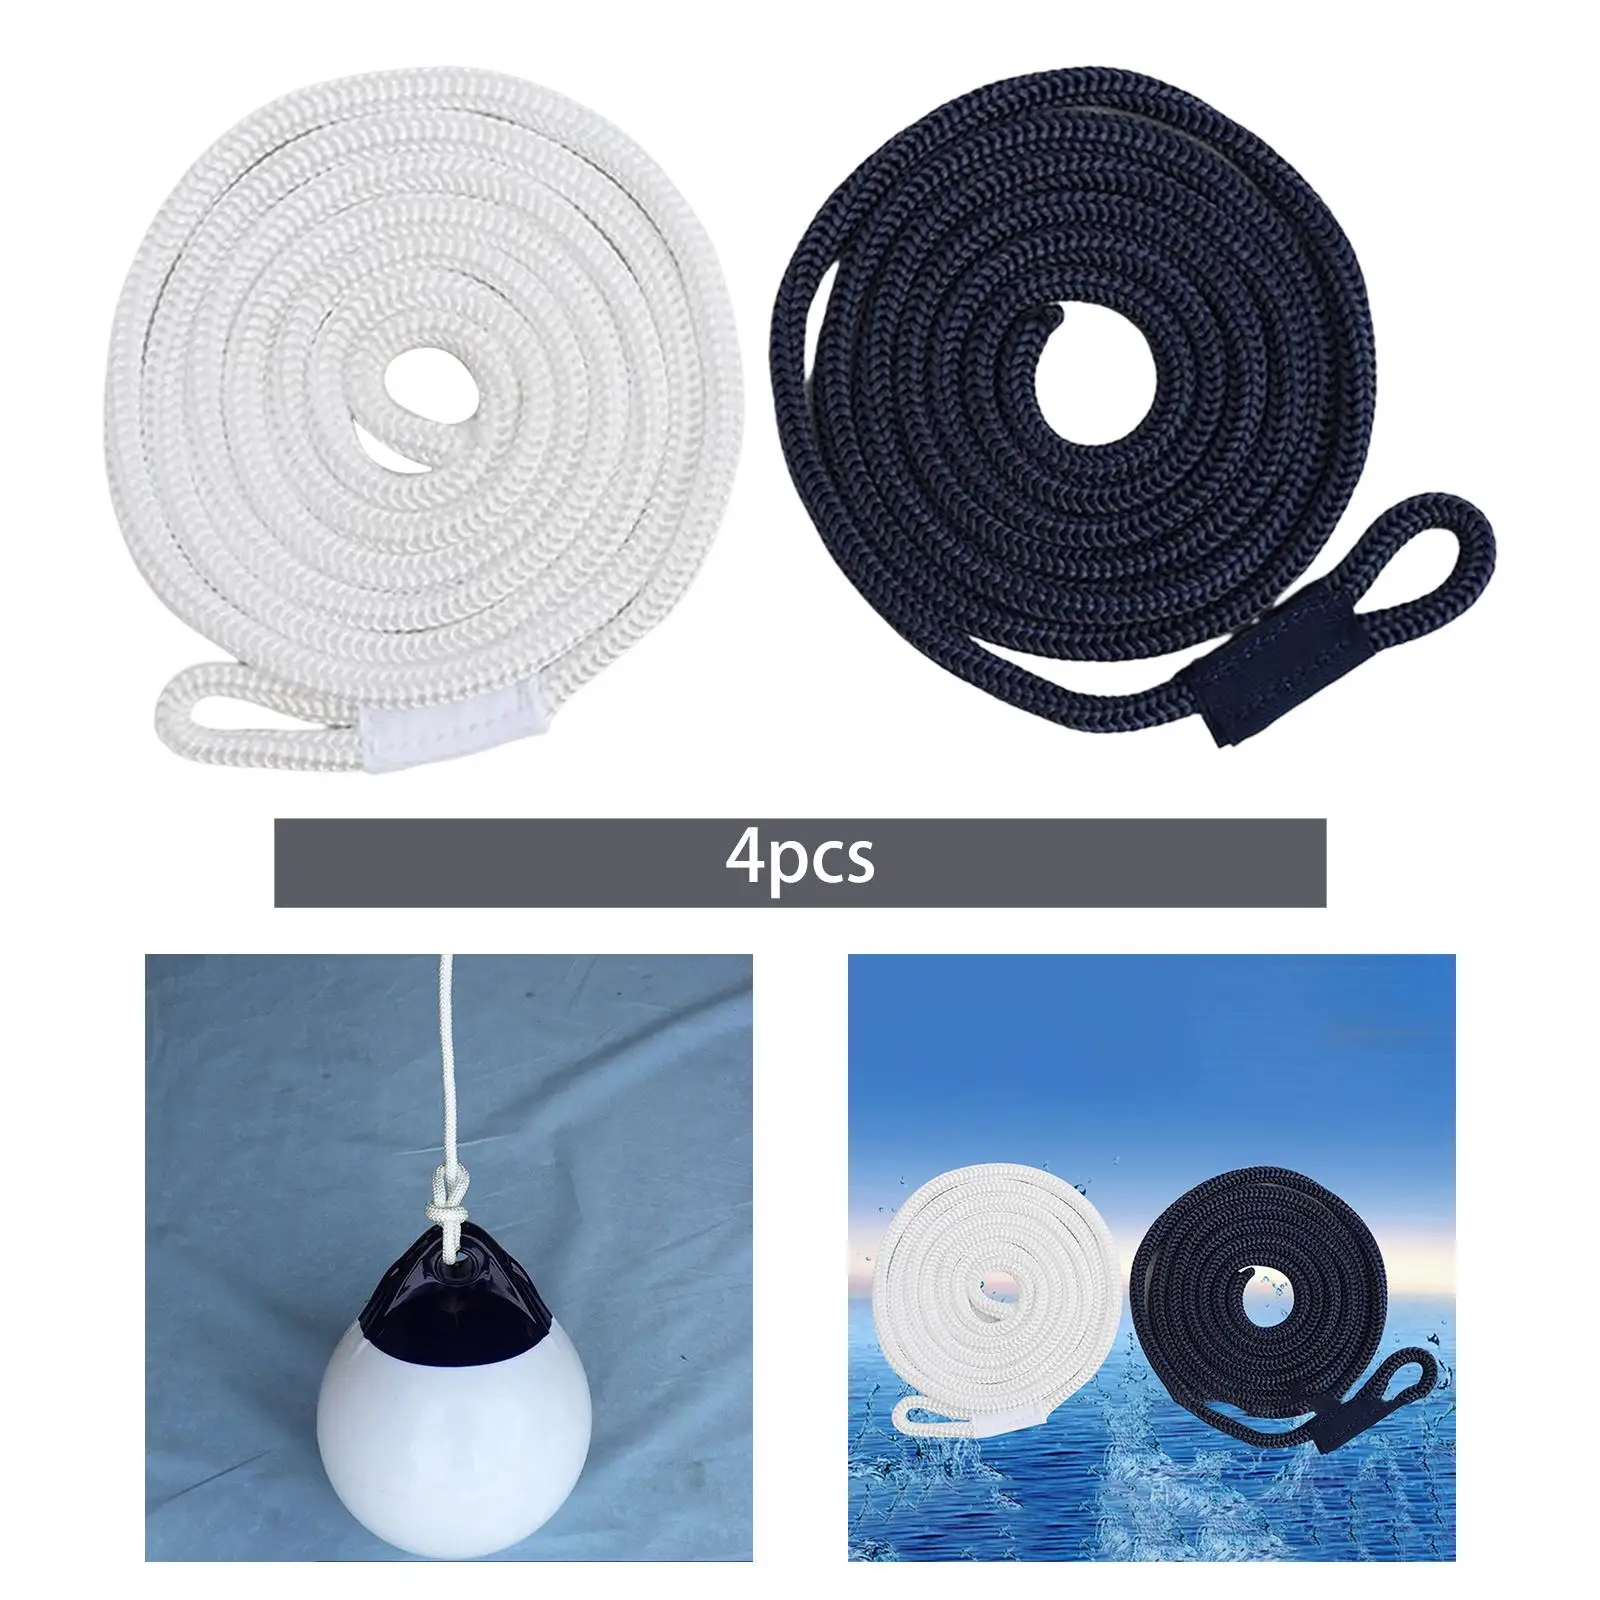 4Pcs Boat Lines, Boats Bumpers,Marine Bumpers for Pontoon Boat, Mooring Rope Bumpers Lines